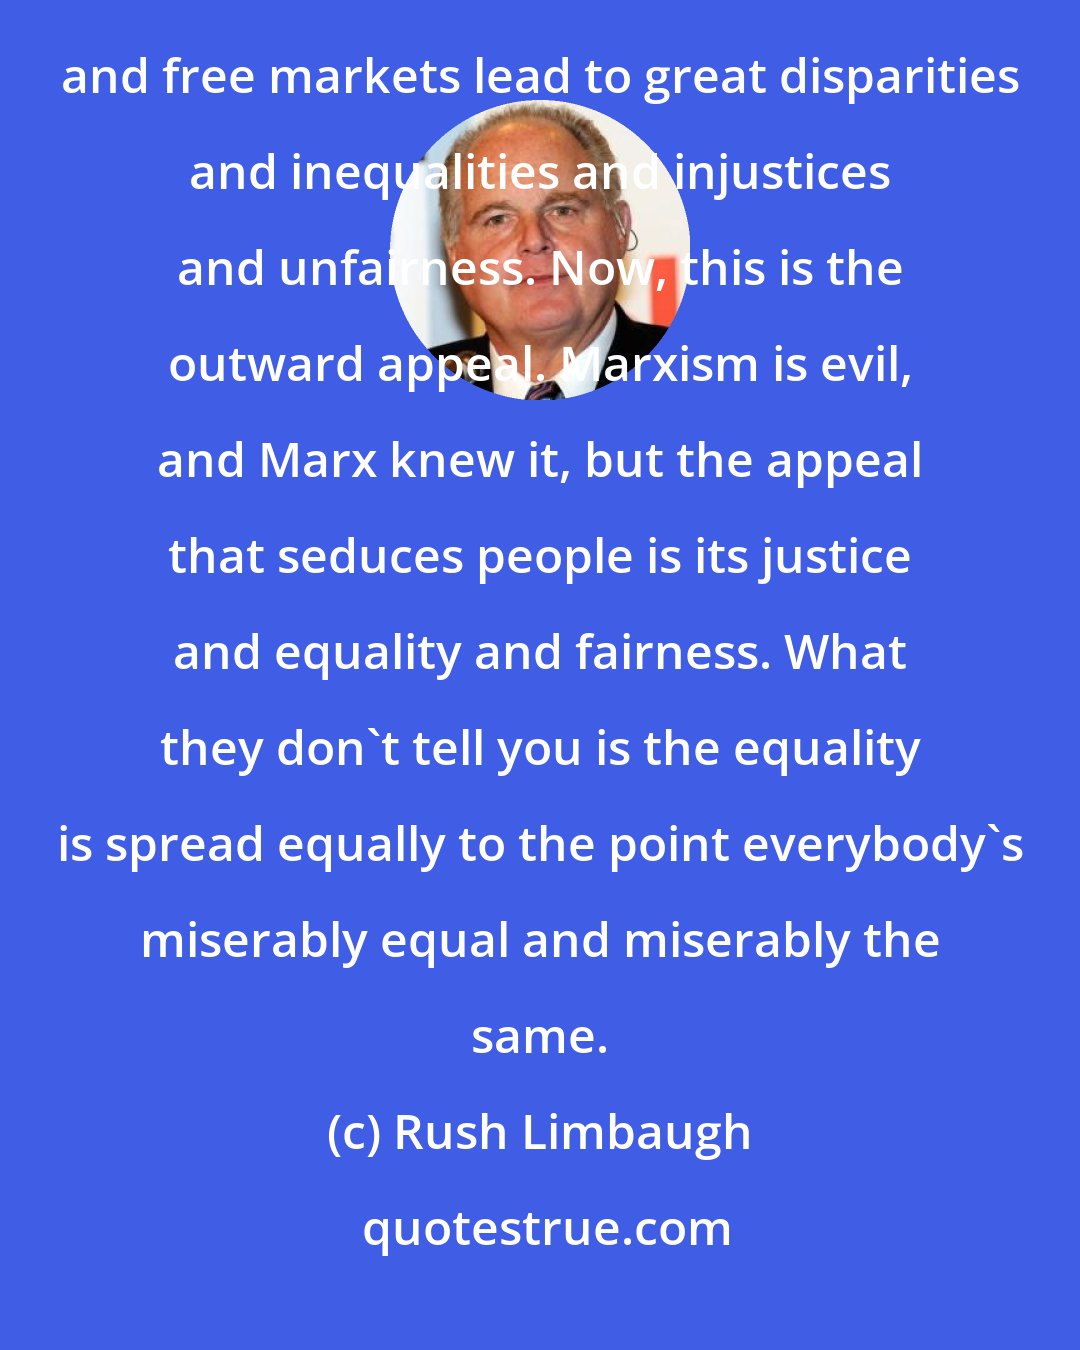 Rush Limbaugh: The fundamental purpose of Marxism is the total control of a population under the belief that individualism and free markets lead to great disparities and inequalities and injustices and unfairness. Now, this is the outward appeal. Marxism is evil, and Marx knew it, but the appeal that seduces people is its justice and equality and fairness. What they don't tell you is the equality is spread equally to the point everybody's miserably equal and miserably the same.